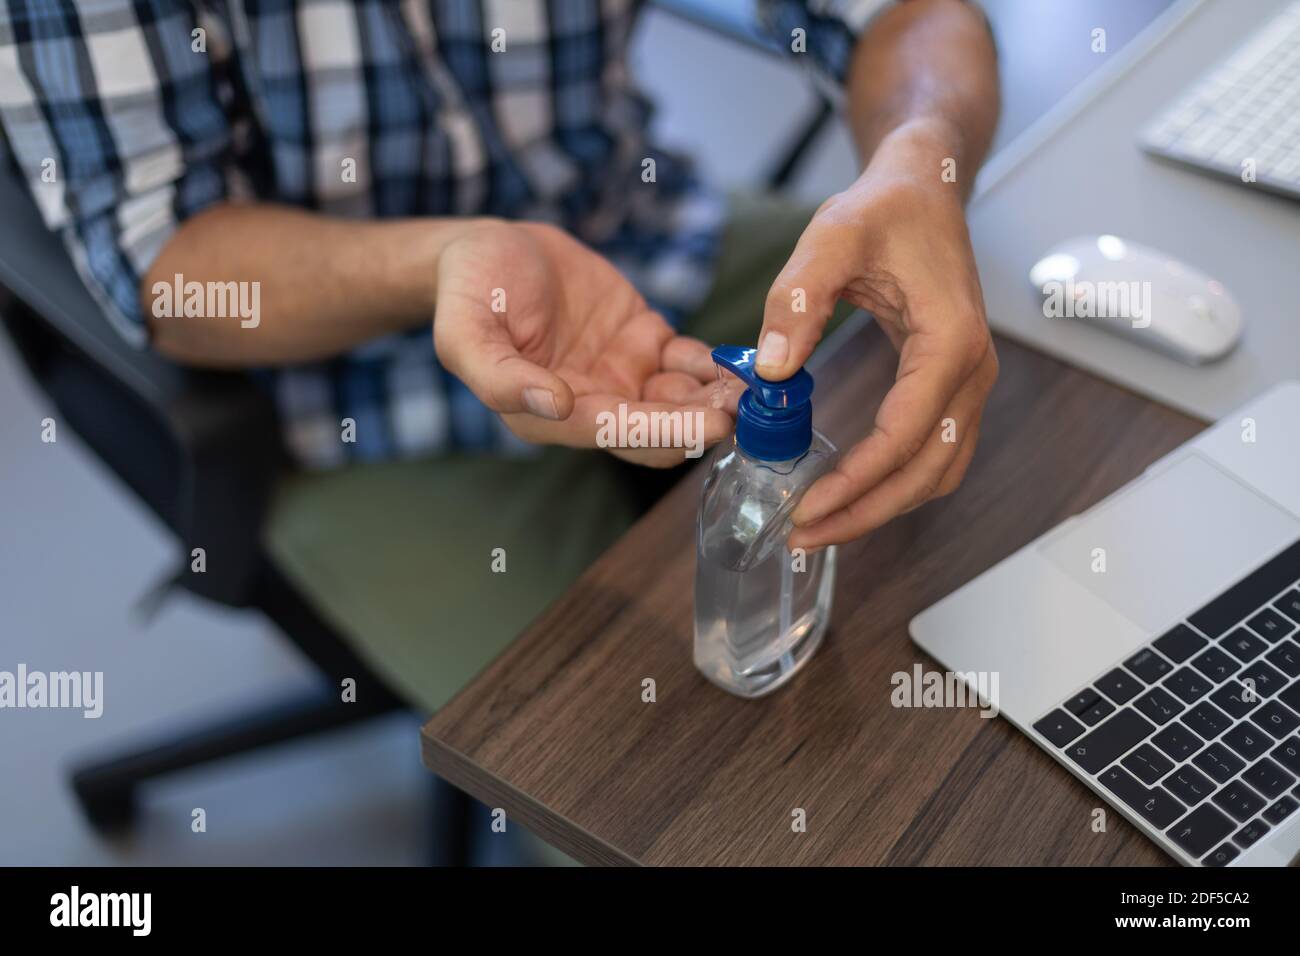 Caucasian man disinfecting his hands in an office Stock Photo